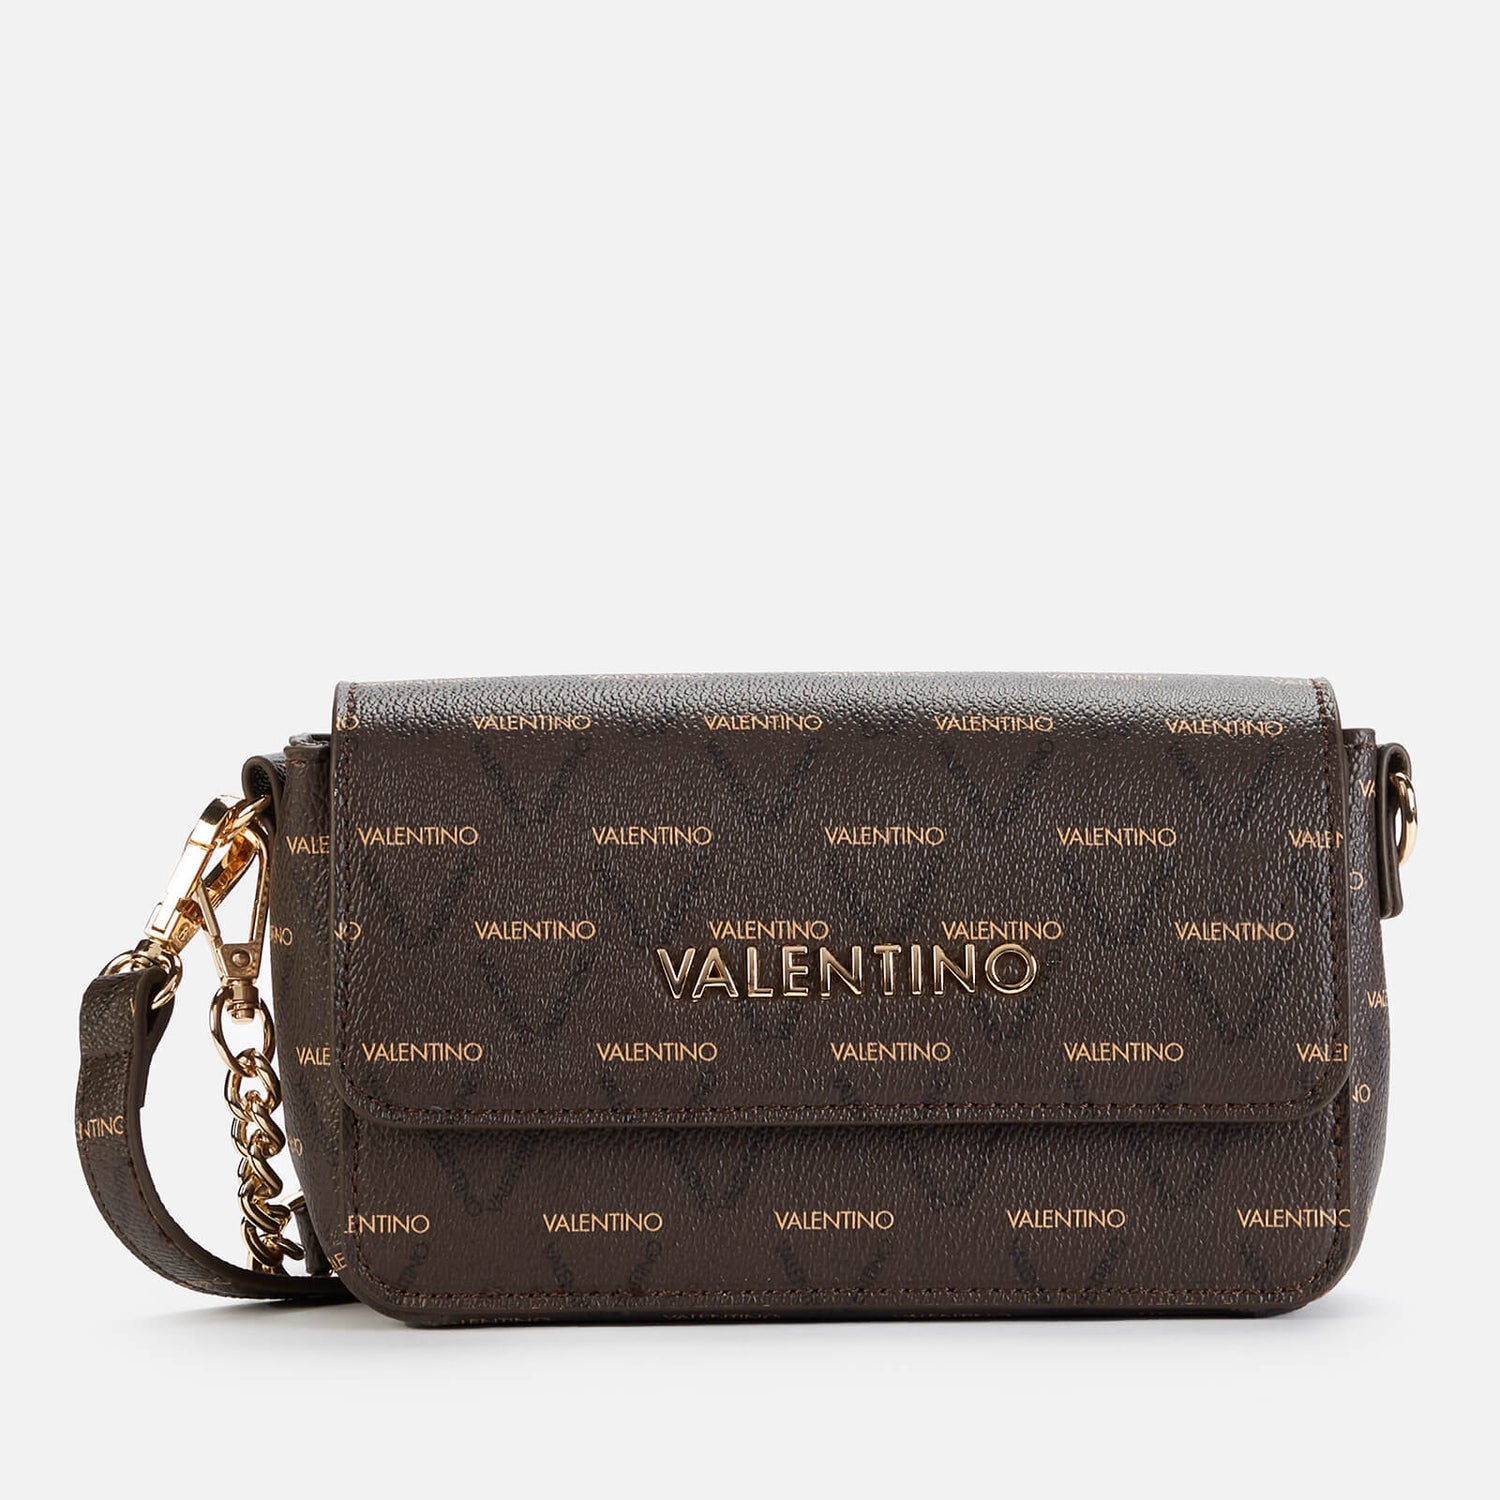 Valentino Bags Women's Champagne Small Shoulder Bag - Brown